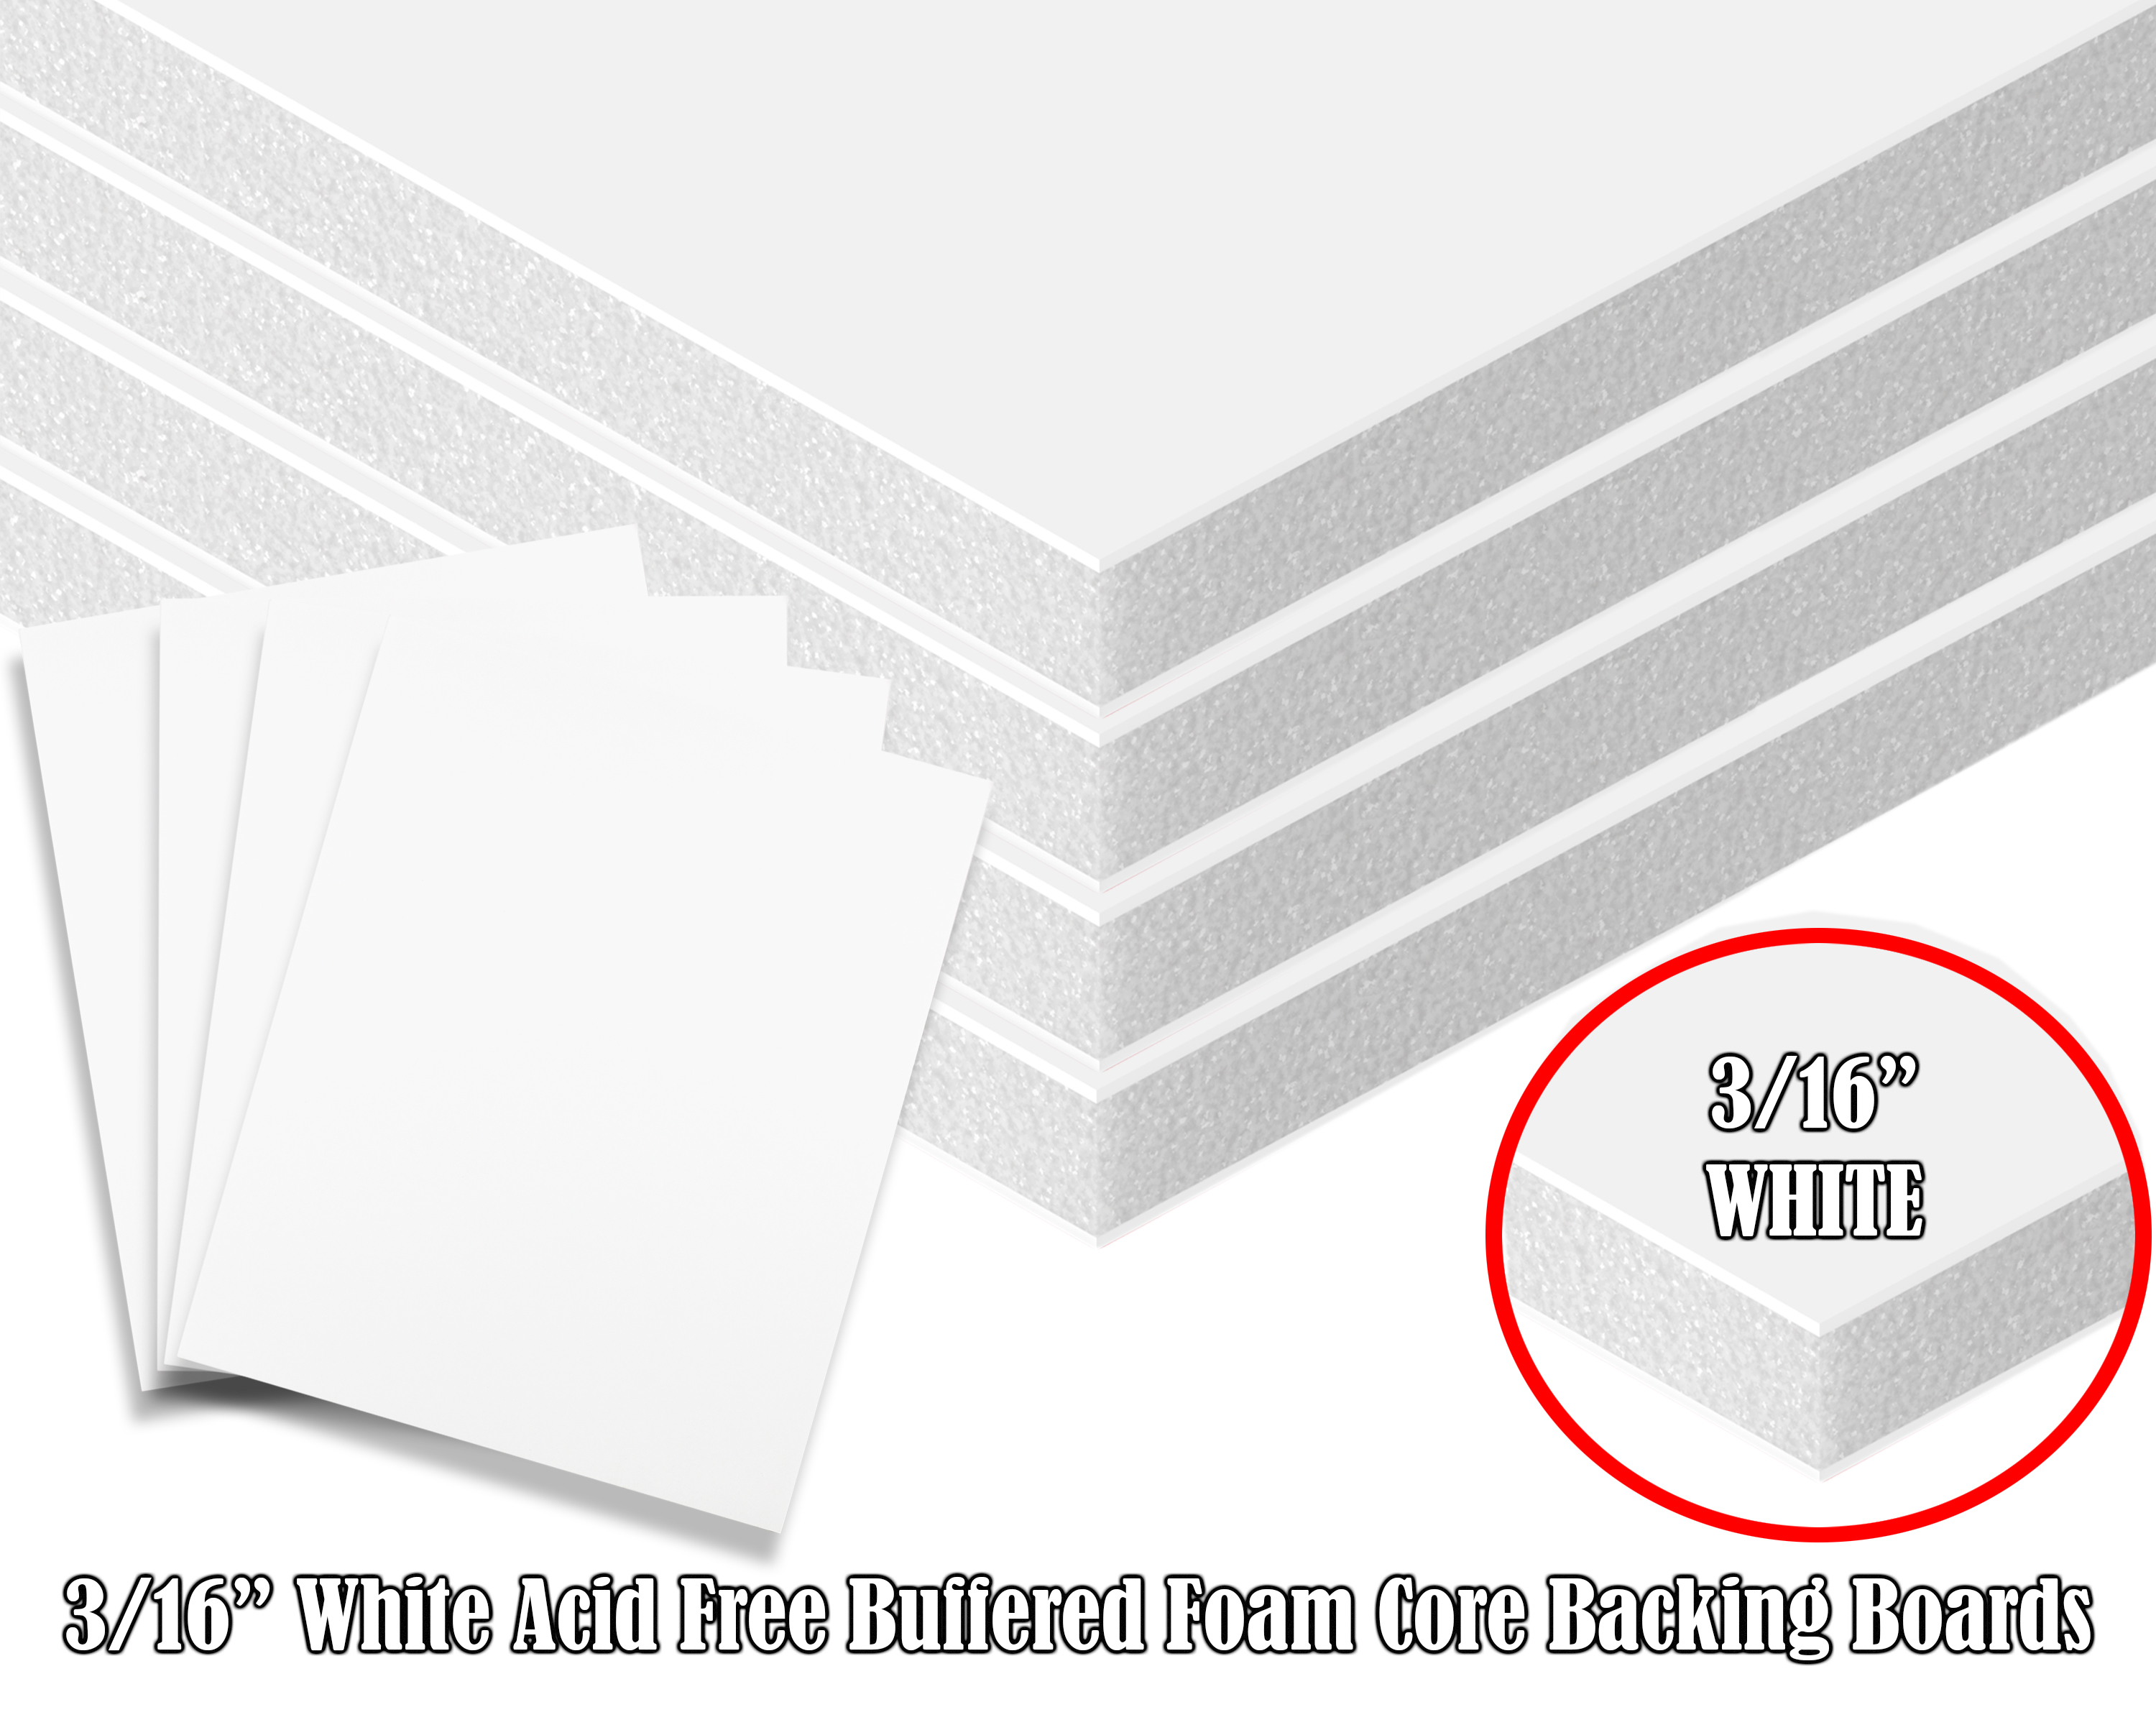 Foam Core Backing Board 3/16 White 24x48- 10 Pack. Many Sizes Available.  Acid Free Buffered Craft Poster Board for Signs, Presentations, School